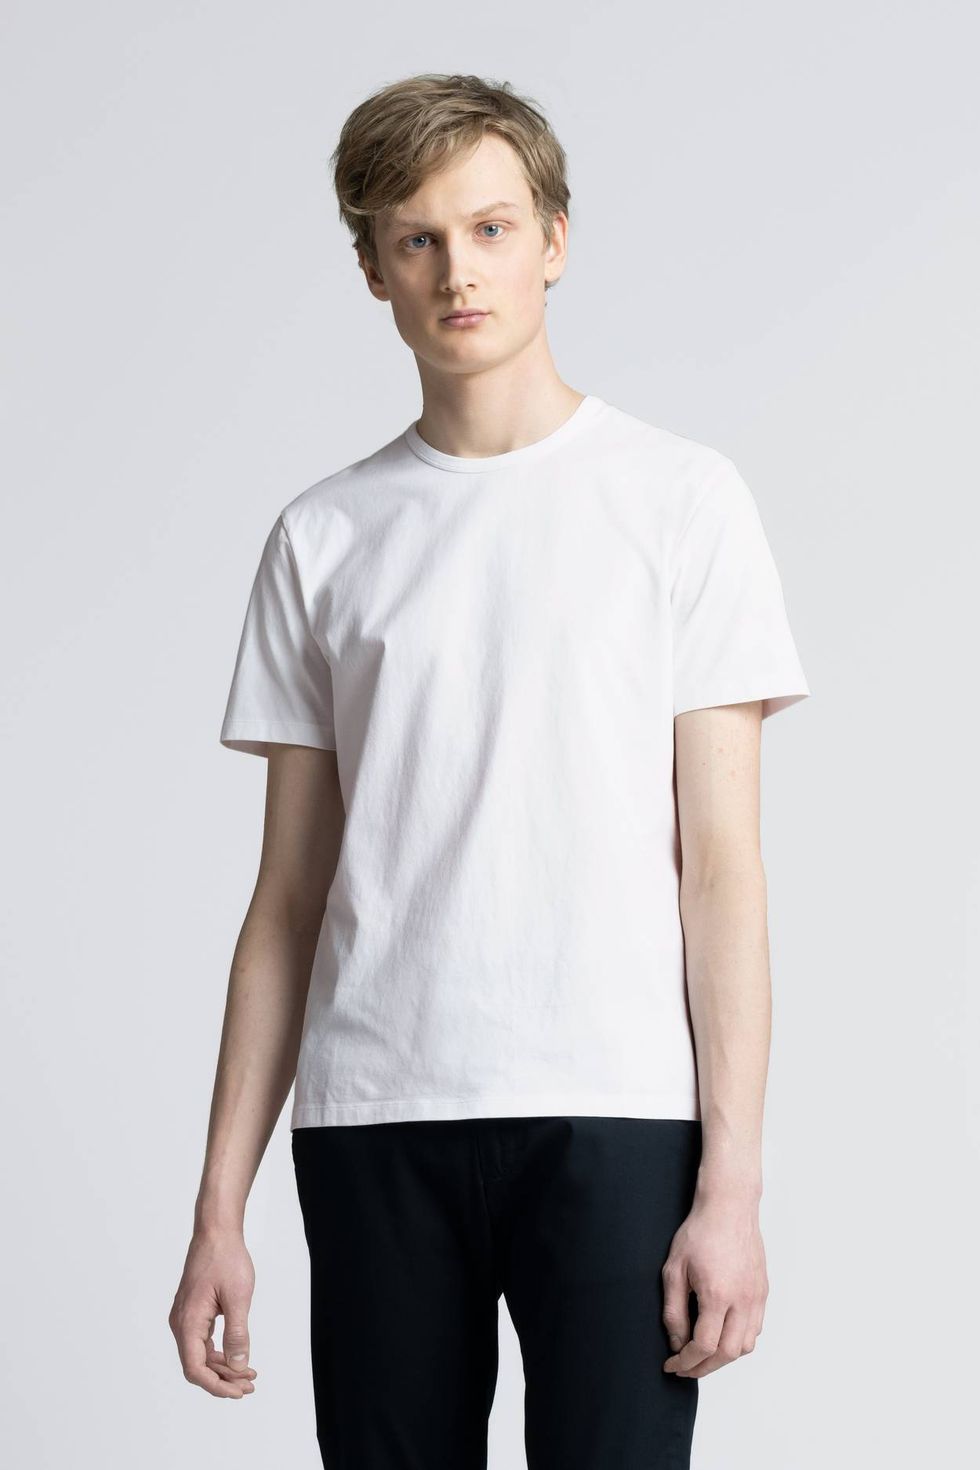 Everlane T-Shirt Review: Each style is hit or miss TBH